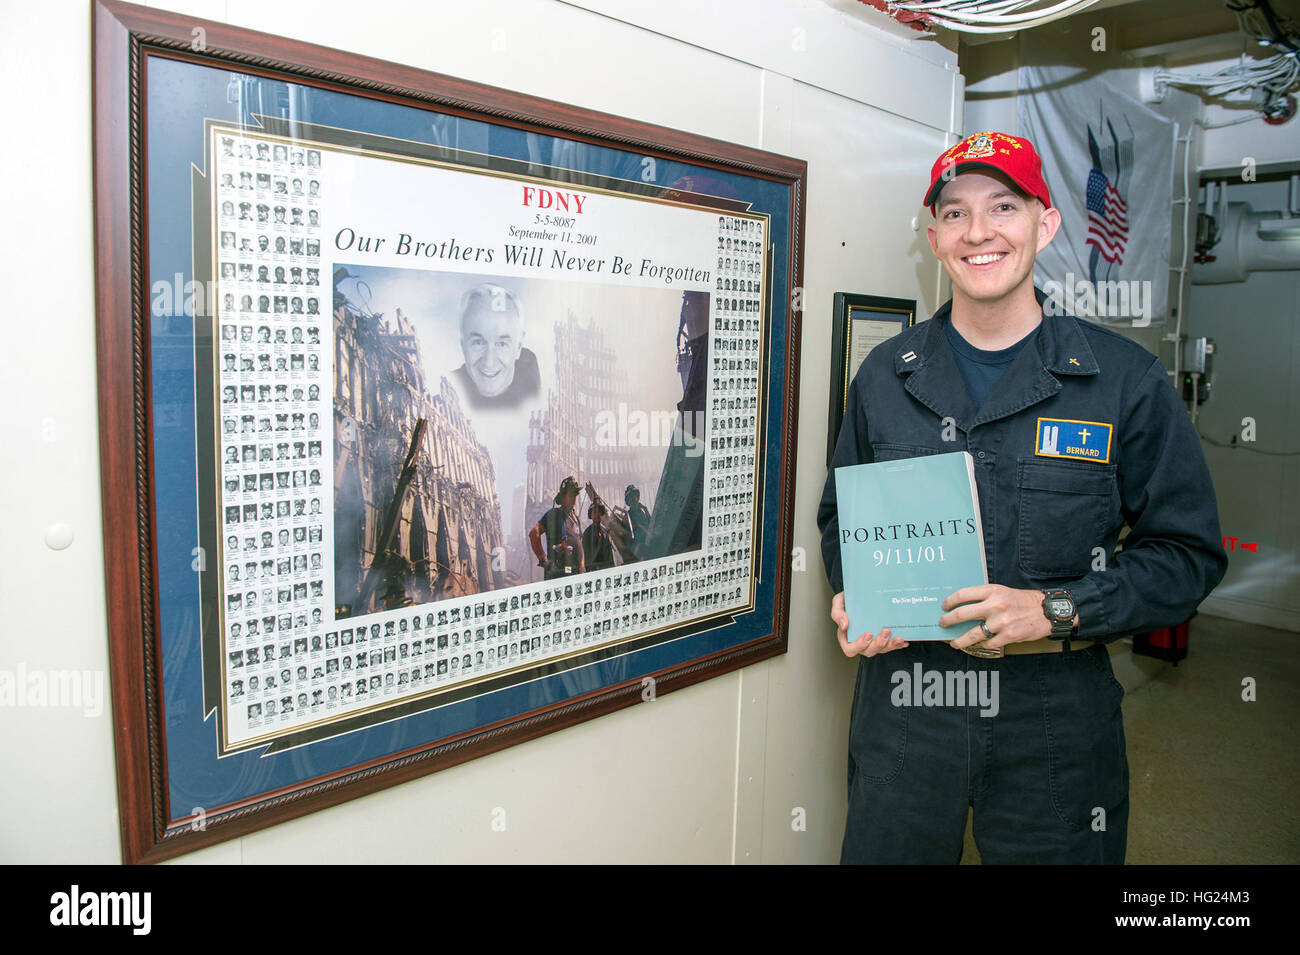 150220-N-XG464-038  ARABIAN GULF (Feb. 20, 2015) - Lt. Justin Bernard, an Aurora, Colo., native and chaplain stationed aboard the amphibious transport dock ship USS New York (LPD 21), poses with a poster of the 343 firefighters who perished during the 9/11 terrorist attacks. New York is a part of the Iwo Jima Amphibious Ready Group (ARG) and, with the embarked 24th Marine Expeditionary Unit (MEU), is deployed in support of maritime security operations and theater security cooperation efforts in the U.S. 5th Fleet area of operations. (U.S. Navy photo by Mass Communication Specialist 3rd Class J Stock Photo